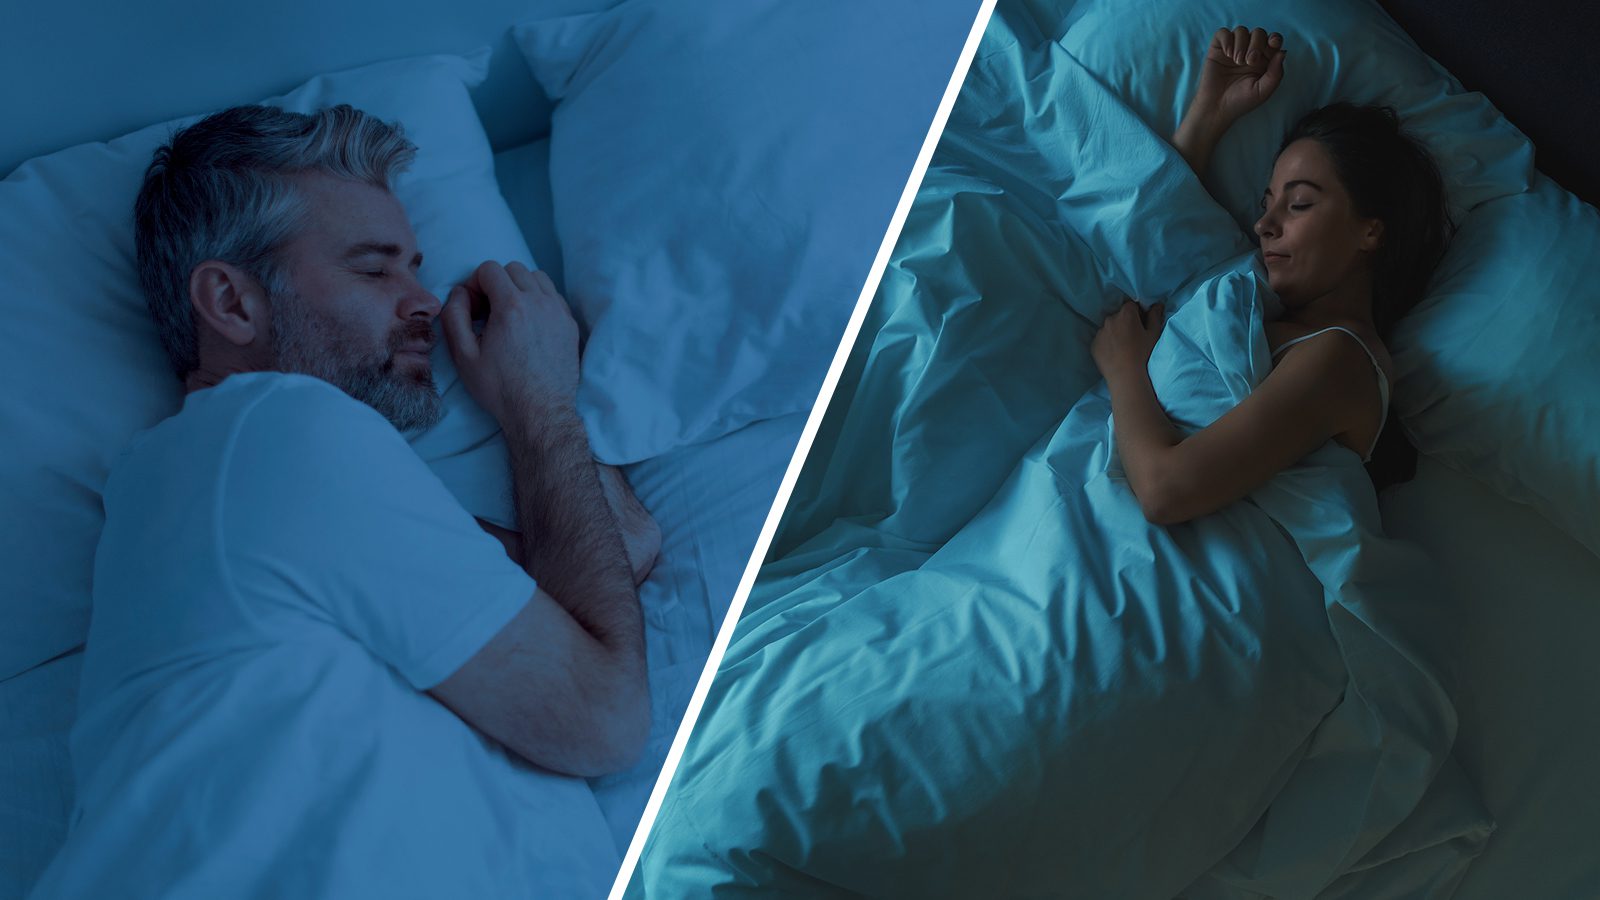 How Sleeping Separately Can Make Your Relationship Healthier